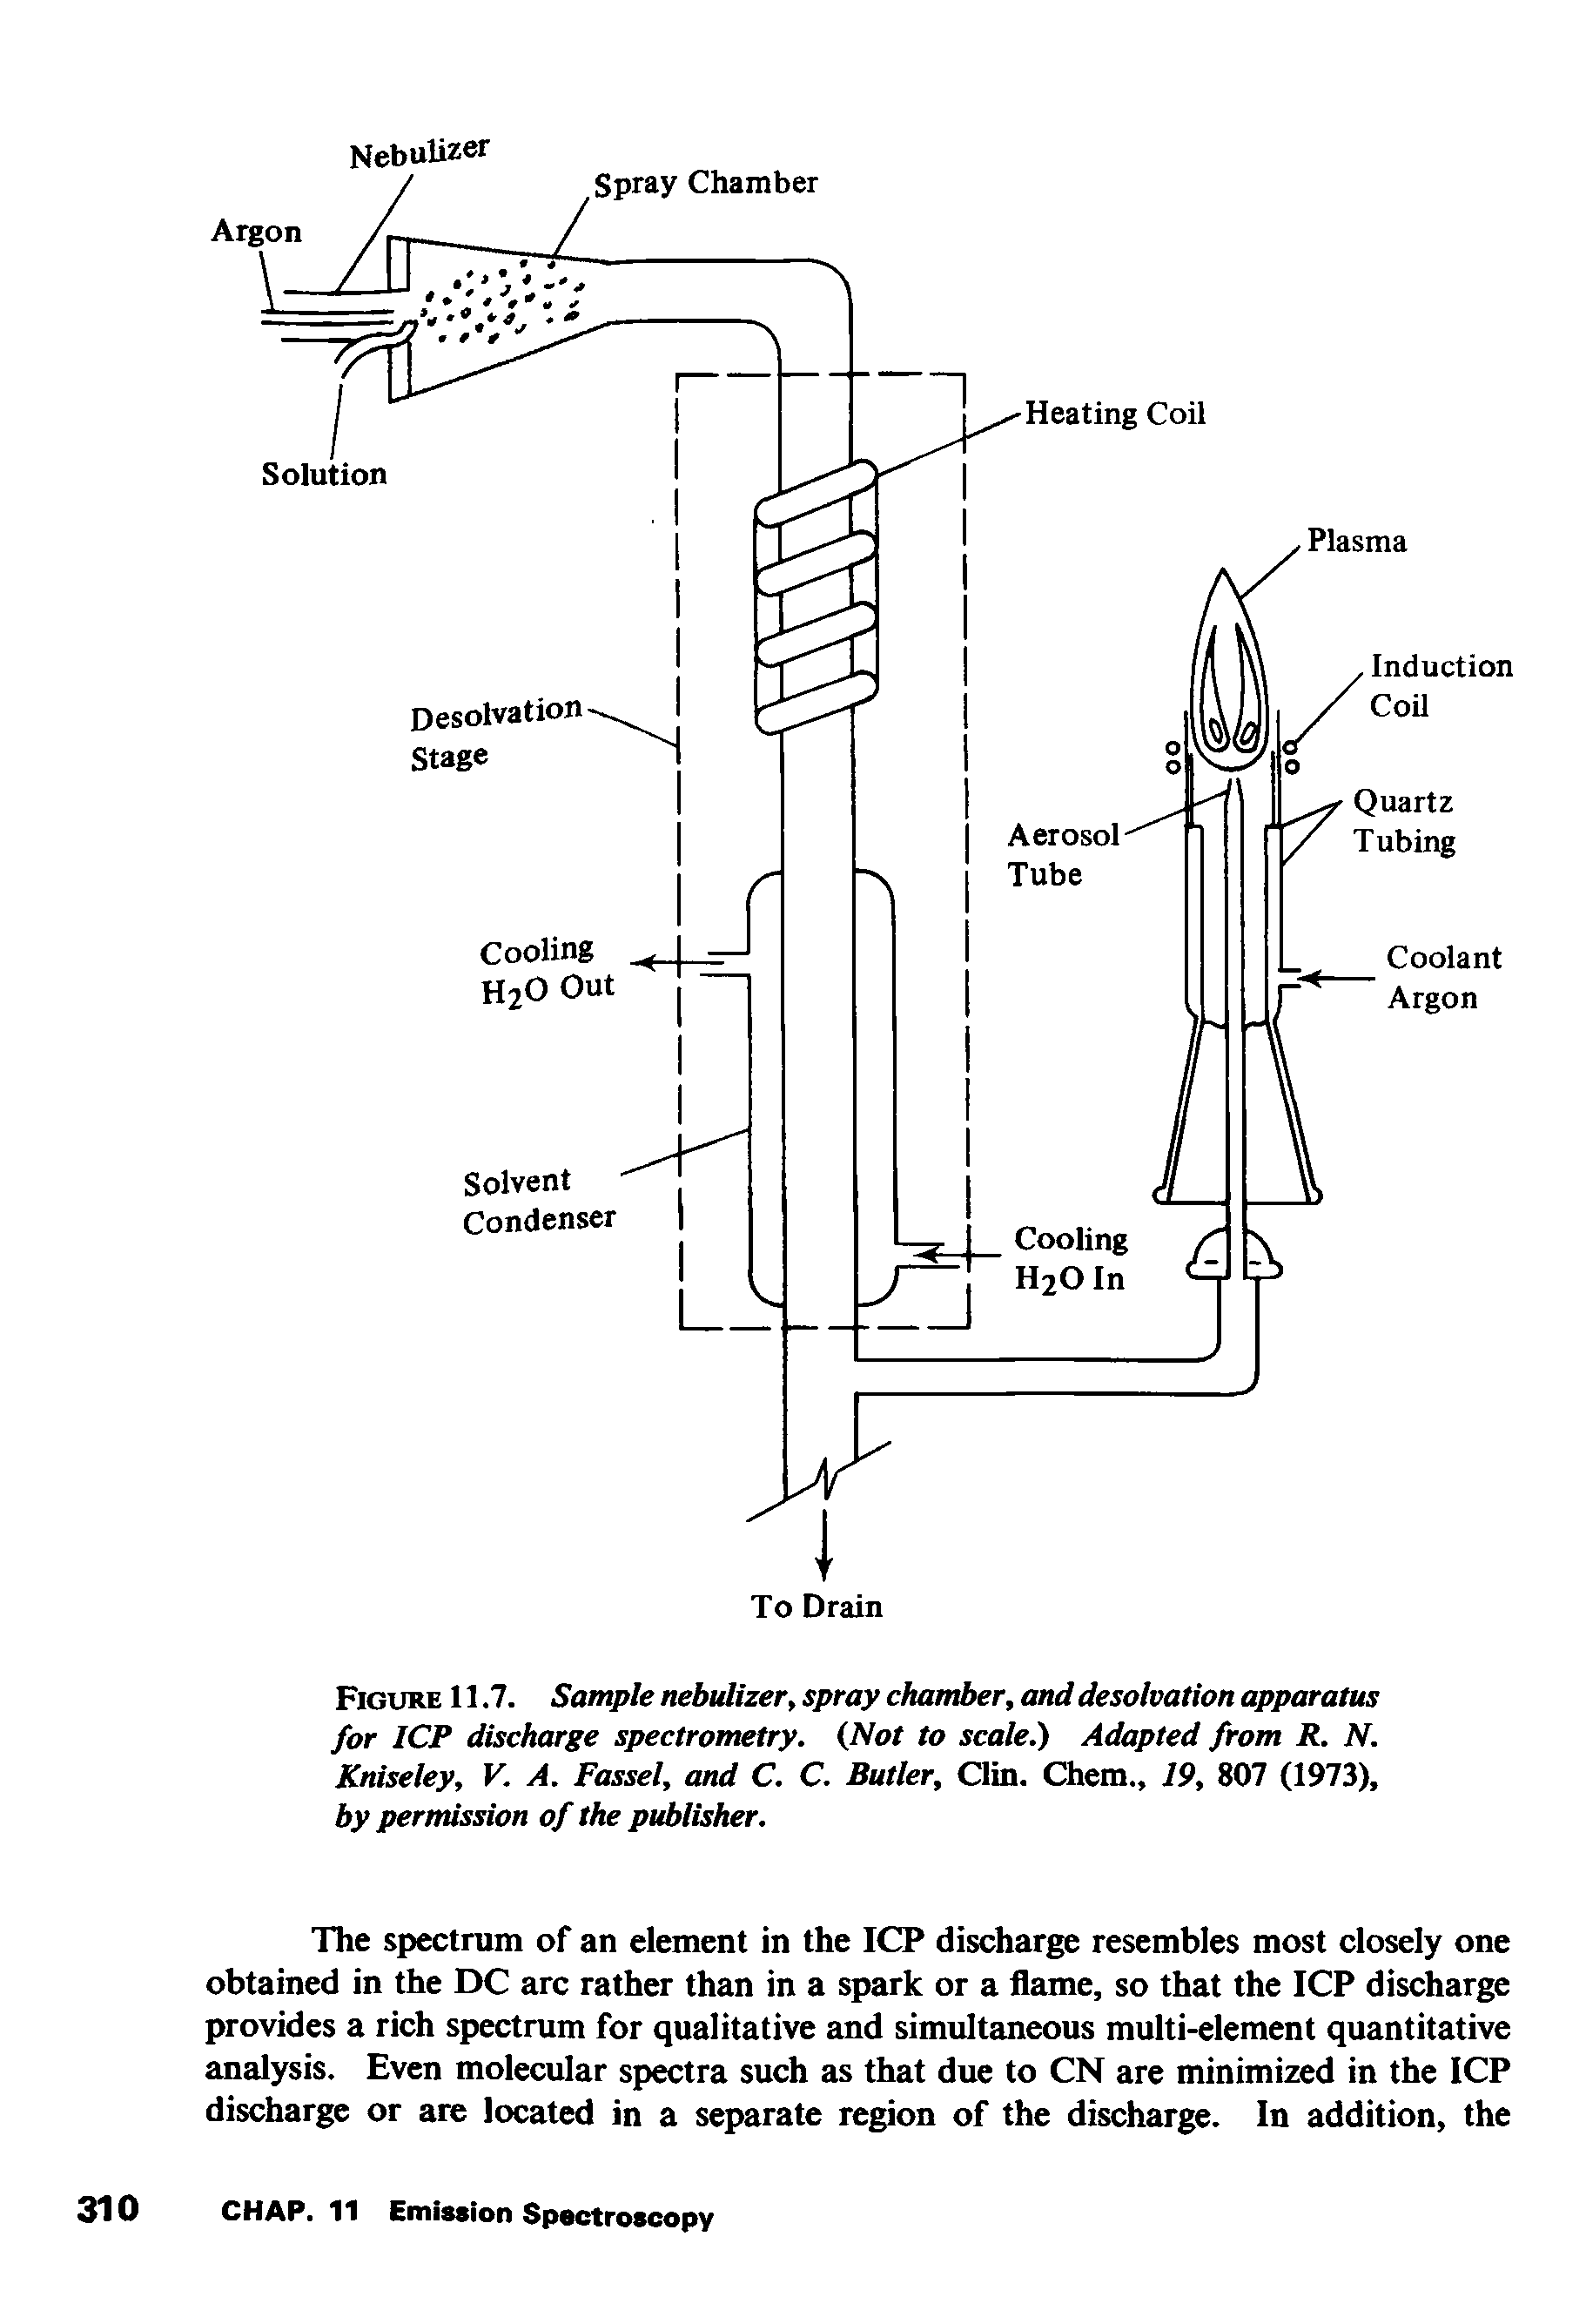 Figure 11.7. Sample nebulizer, spray chamber, and desolvation apparatus for ICP discharge spectrometry. (Not to scale.) Adapted from R. N. Kniseley, V. A. Fassel, and C. C. Butler, Clin. Chem., 19, 807 (1973), by permission of the publisher.